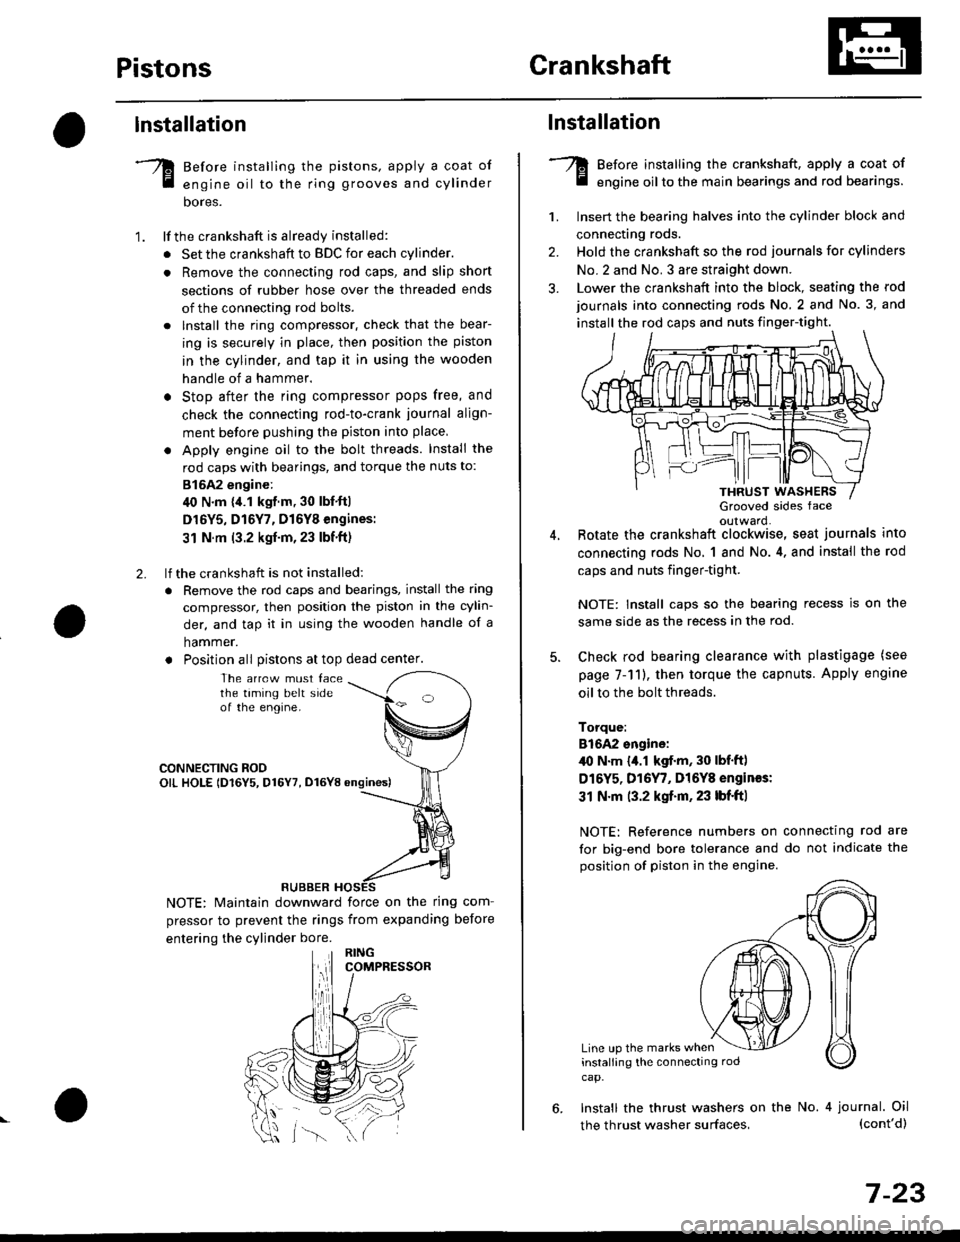 HONDA CIVIC 2000 6.G Repair Manual PistonsGrankshaft
lnstallation
Before installing the pistons, apply a coat of
engine oil to the ring grooves and cylinder
bores.
lf the crankshaft is already installed:
. Set the crankshaft to BDC for